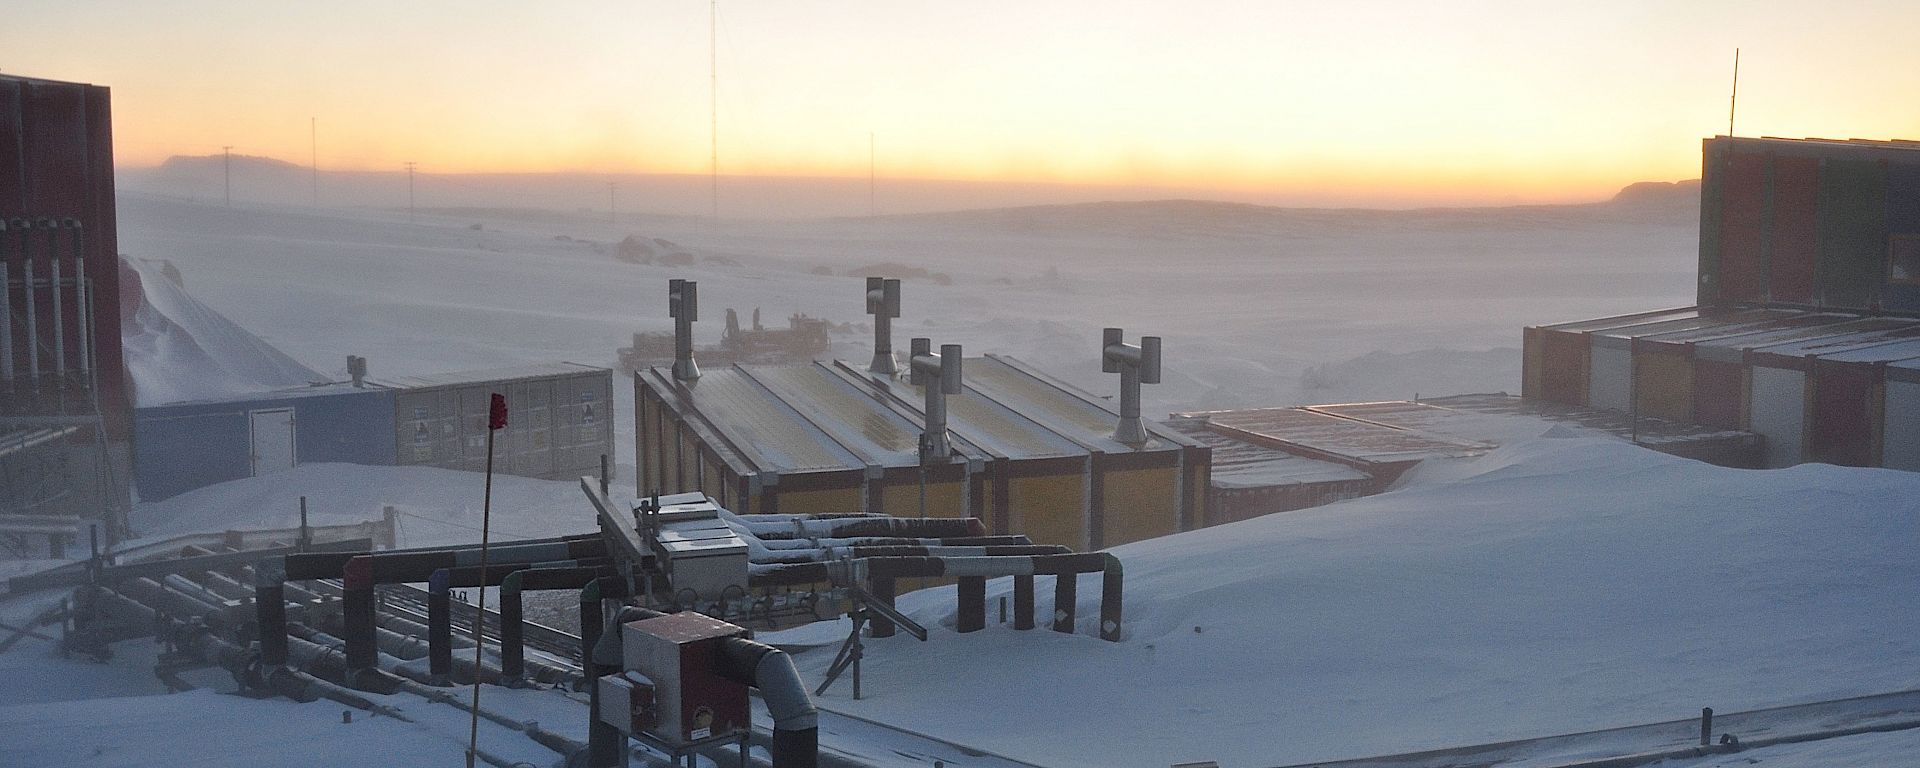 Aerial view of service piping leading from buildings with snowdrift, golden horizon in the background.